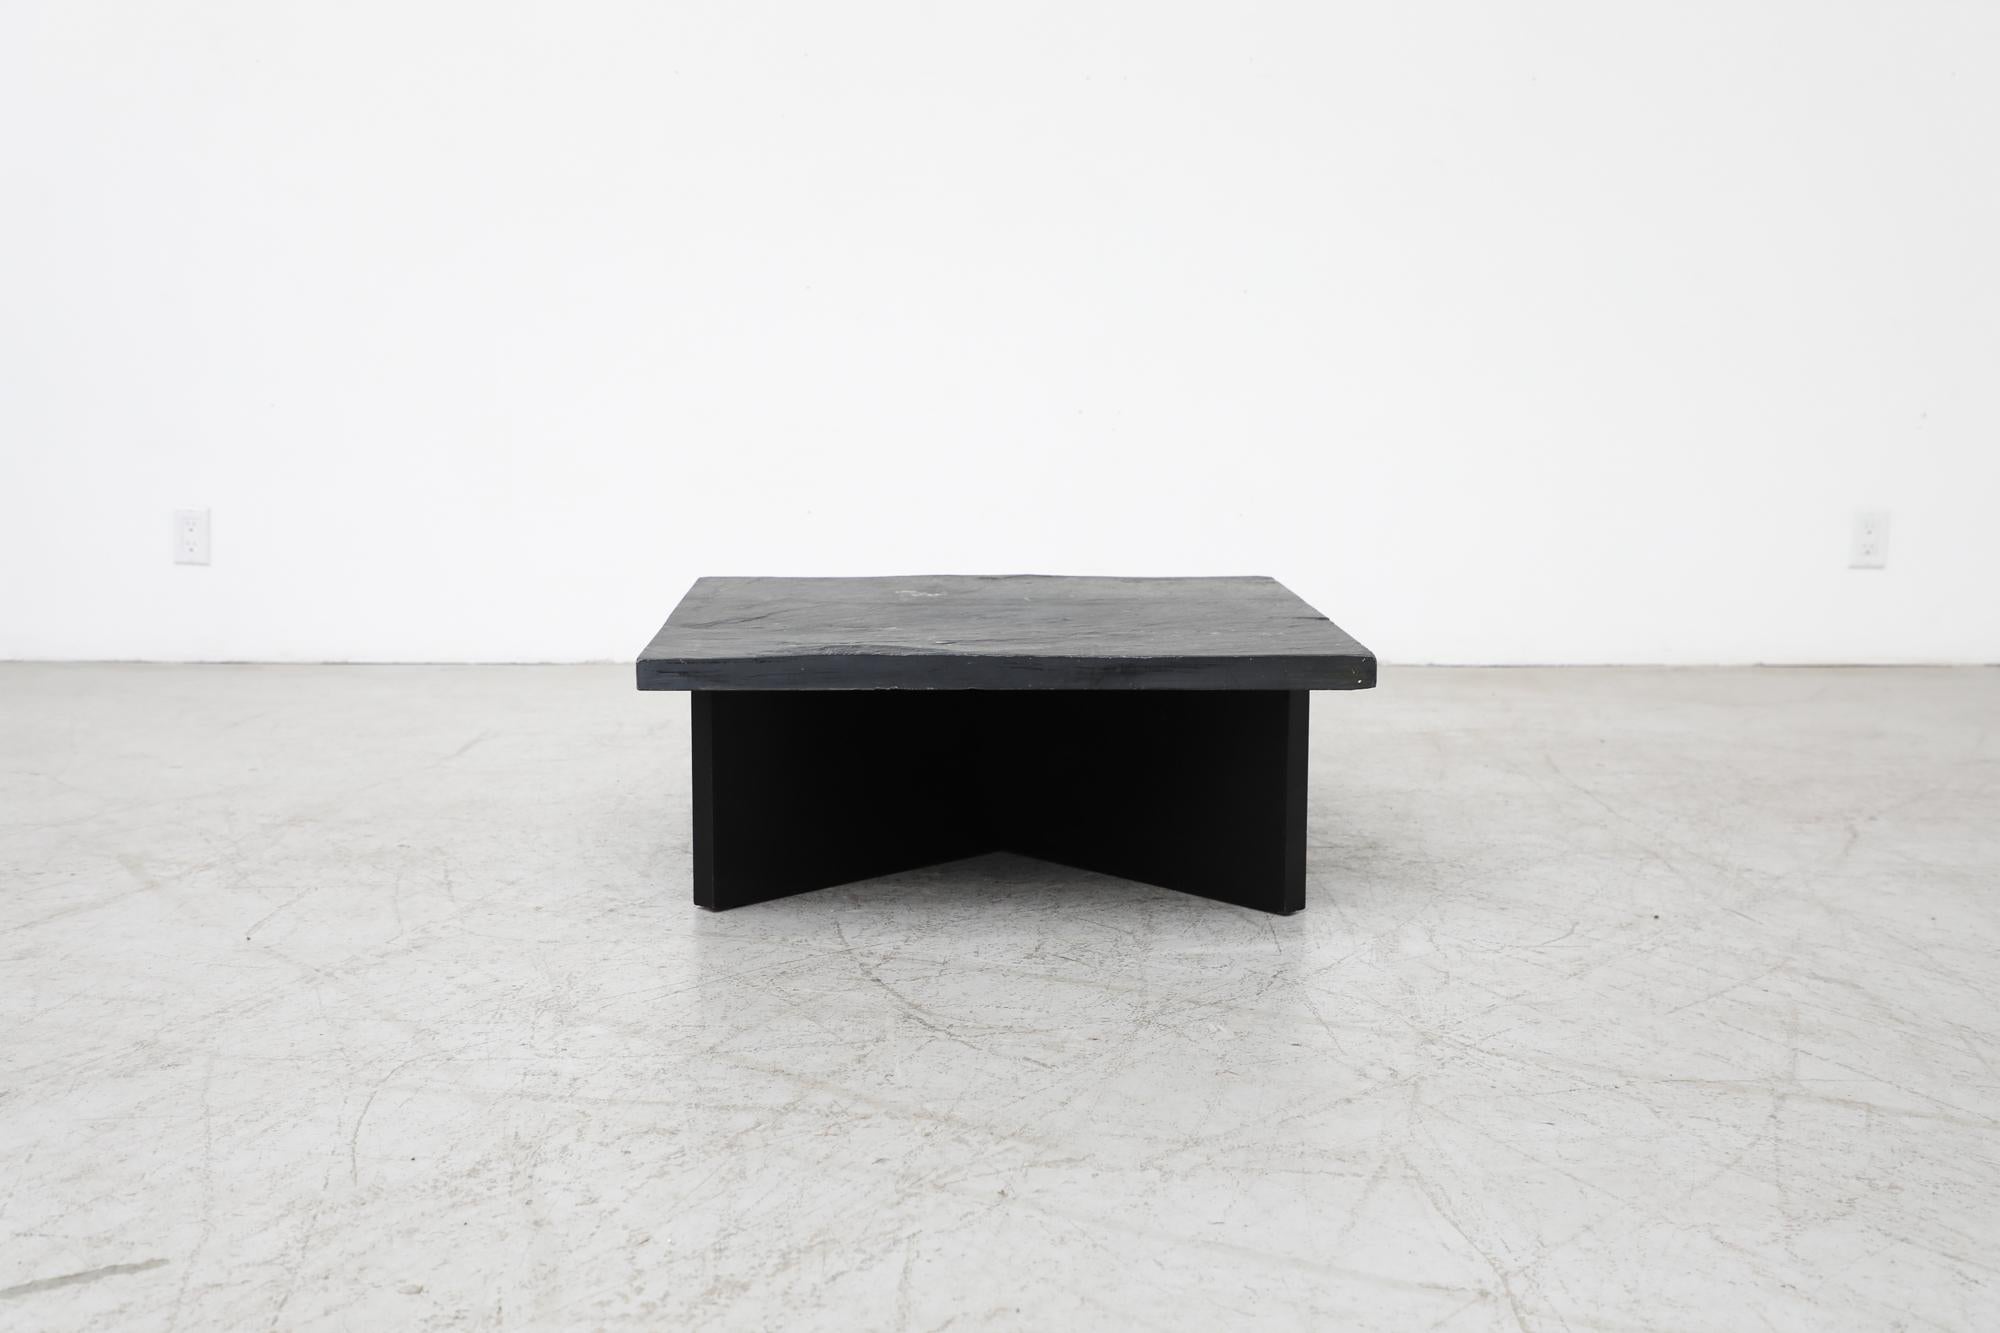 Stunning Metaform (attr) large square stone side table or coffee table. This large slab of stone sits on top of a wooden X shaped base. In good original condition with visible wear that is consistent with its age and use including chipping and